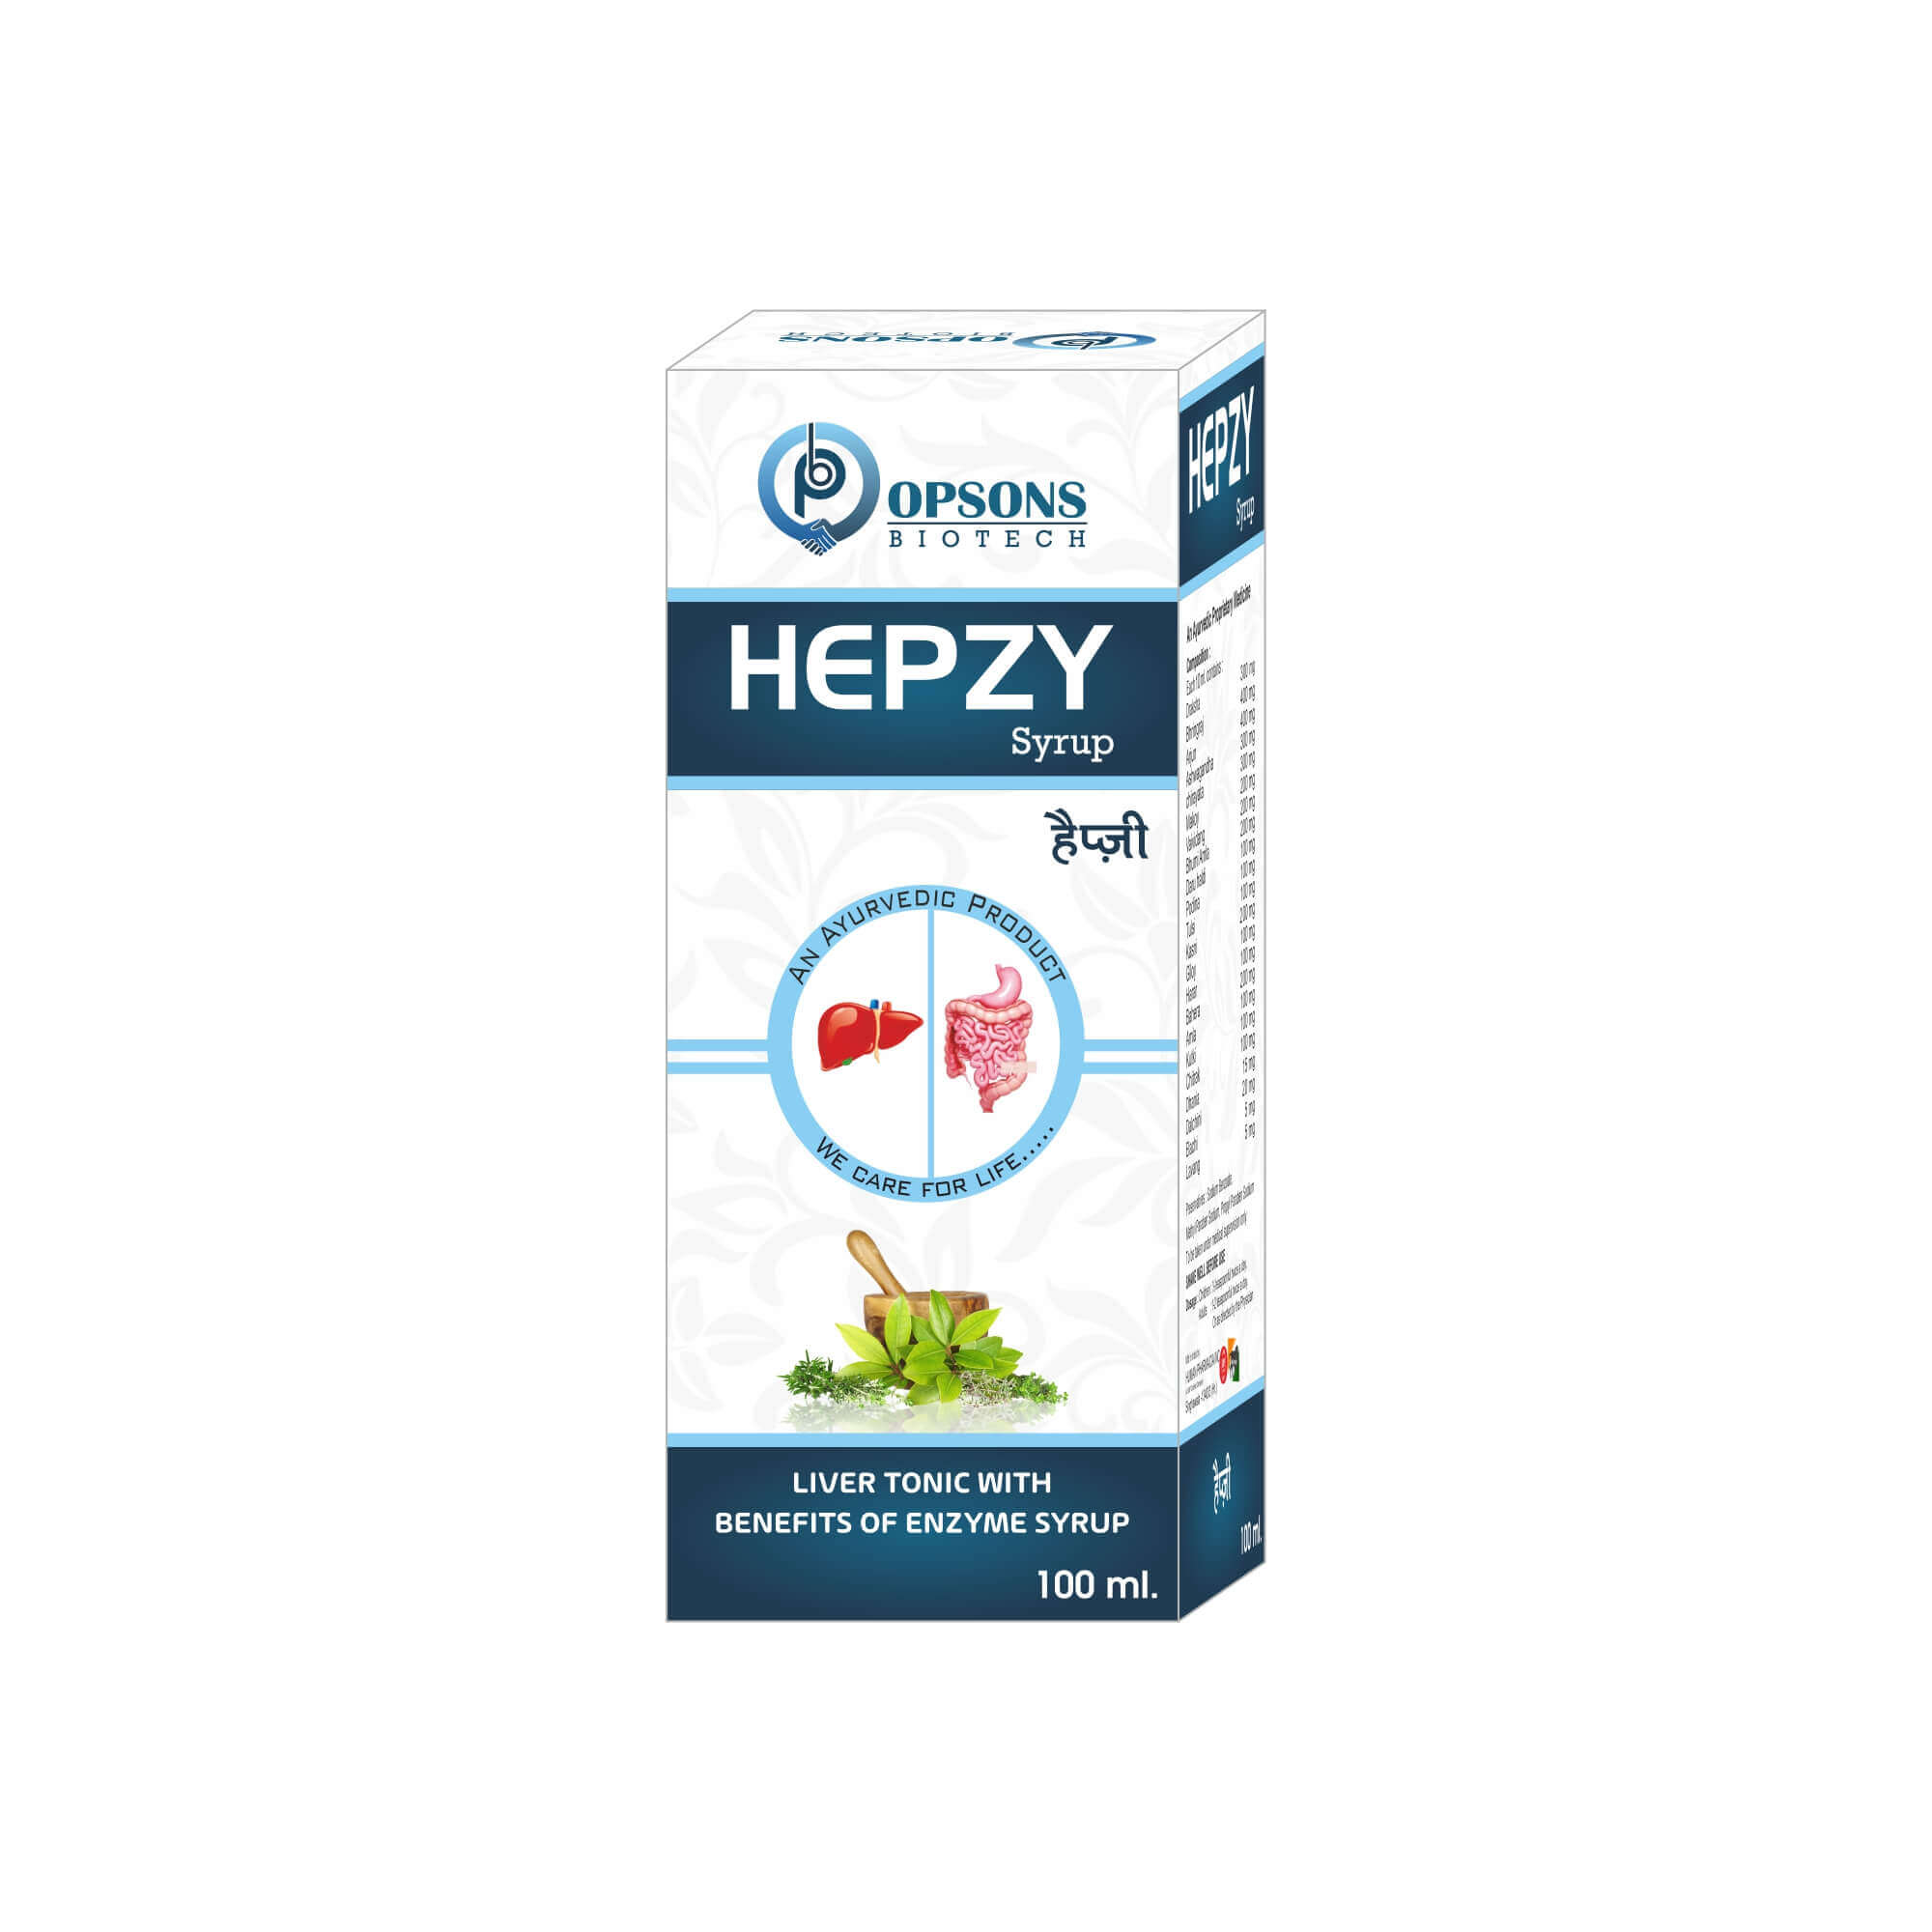 Product Name: Hepzy, Compositions of Hepzy are Liver Tonic with Benefits of Enzyme Syrup - Opsons Biotech